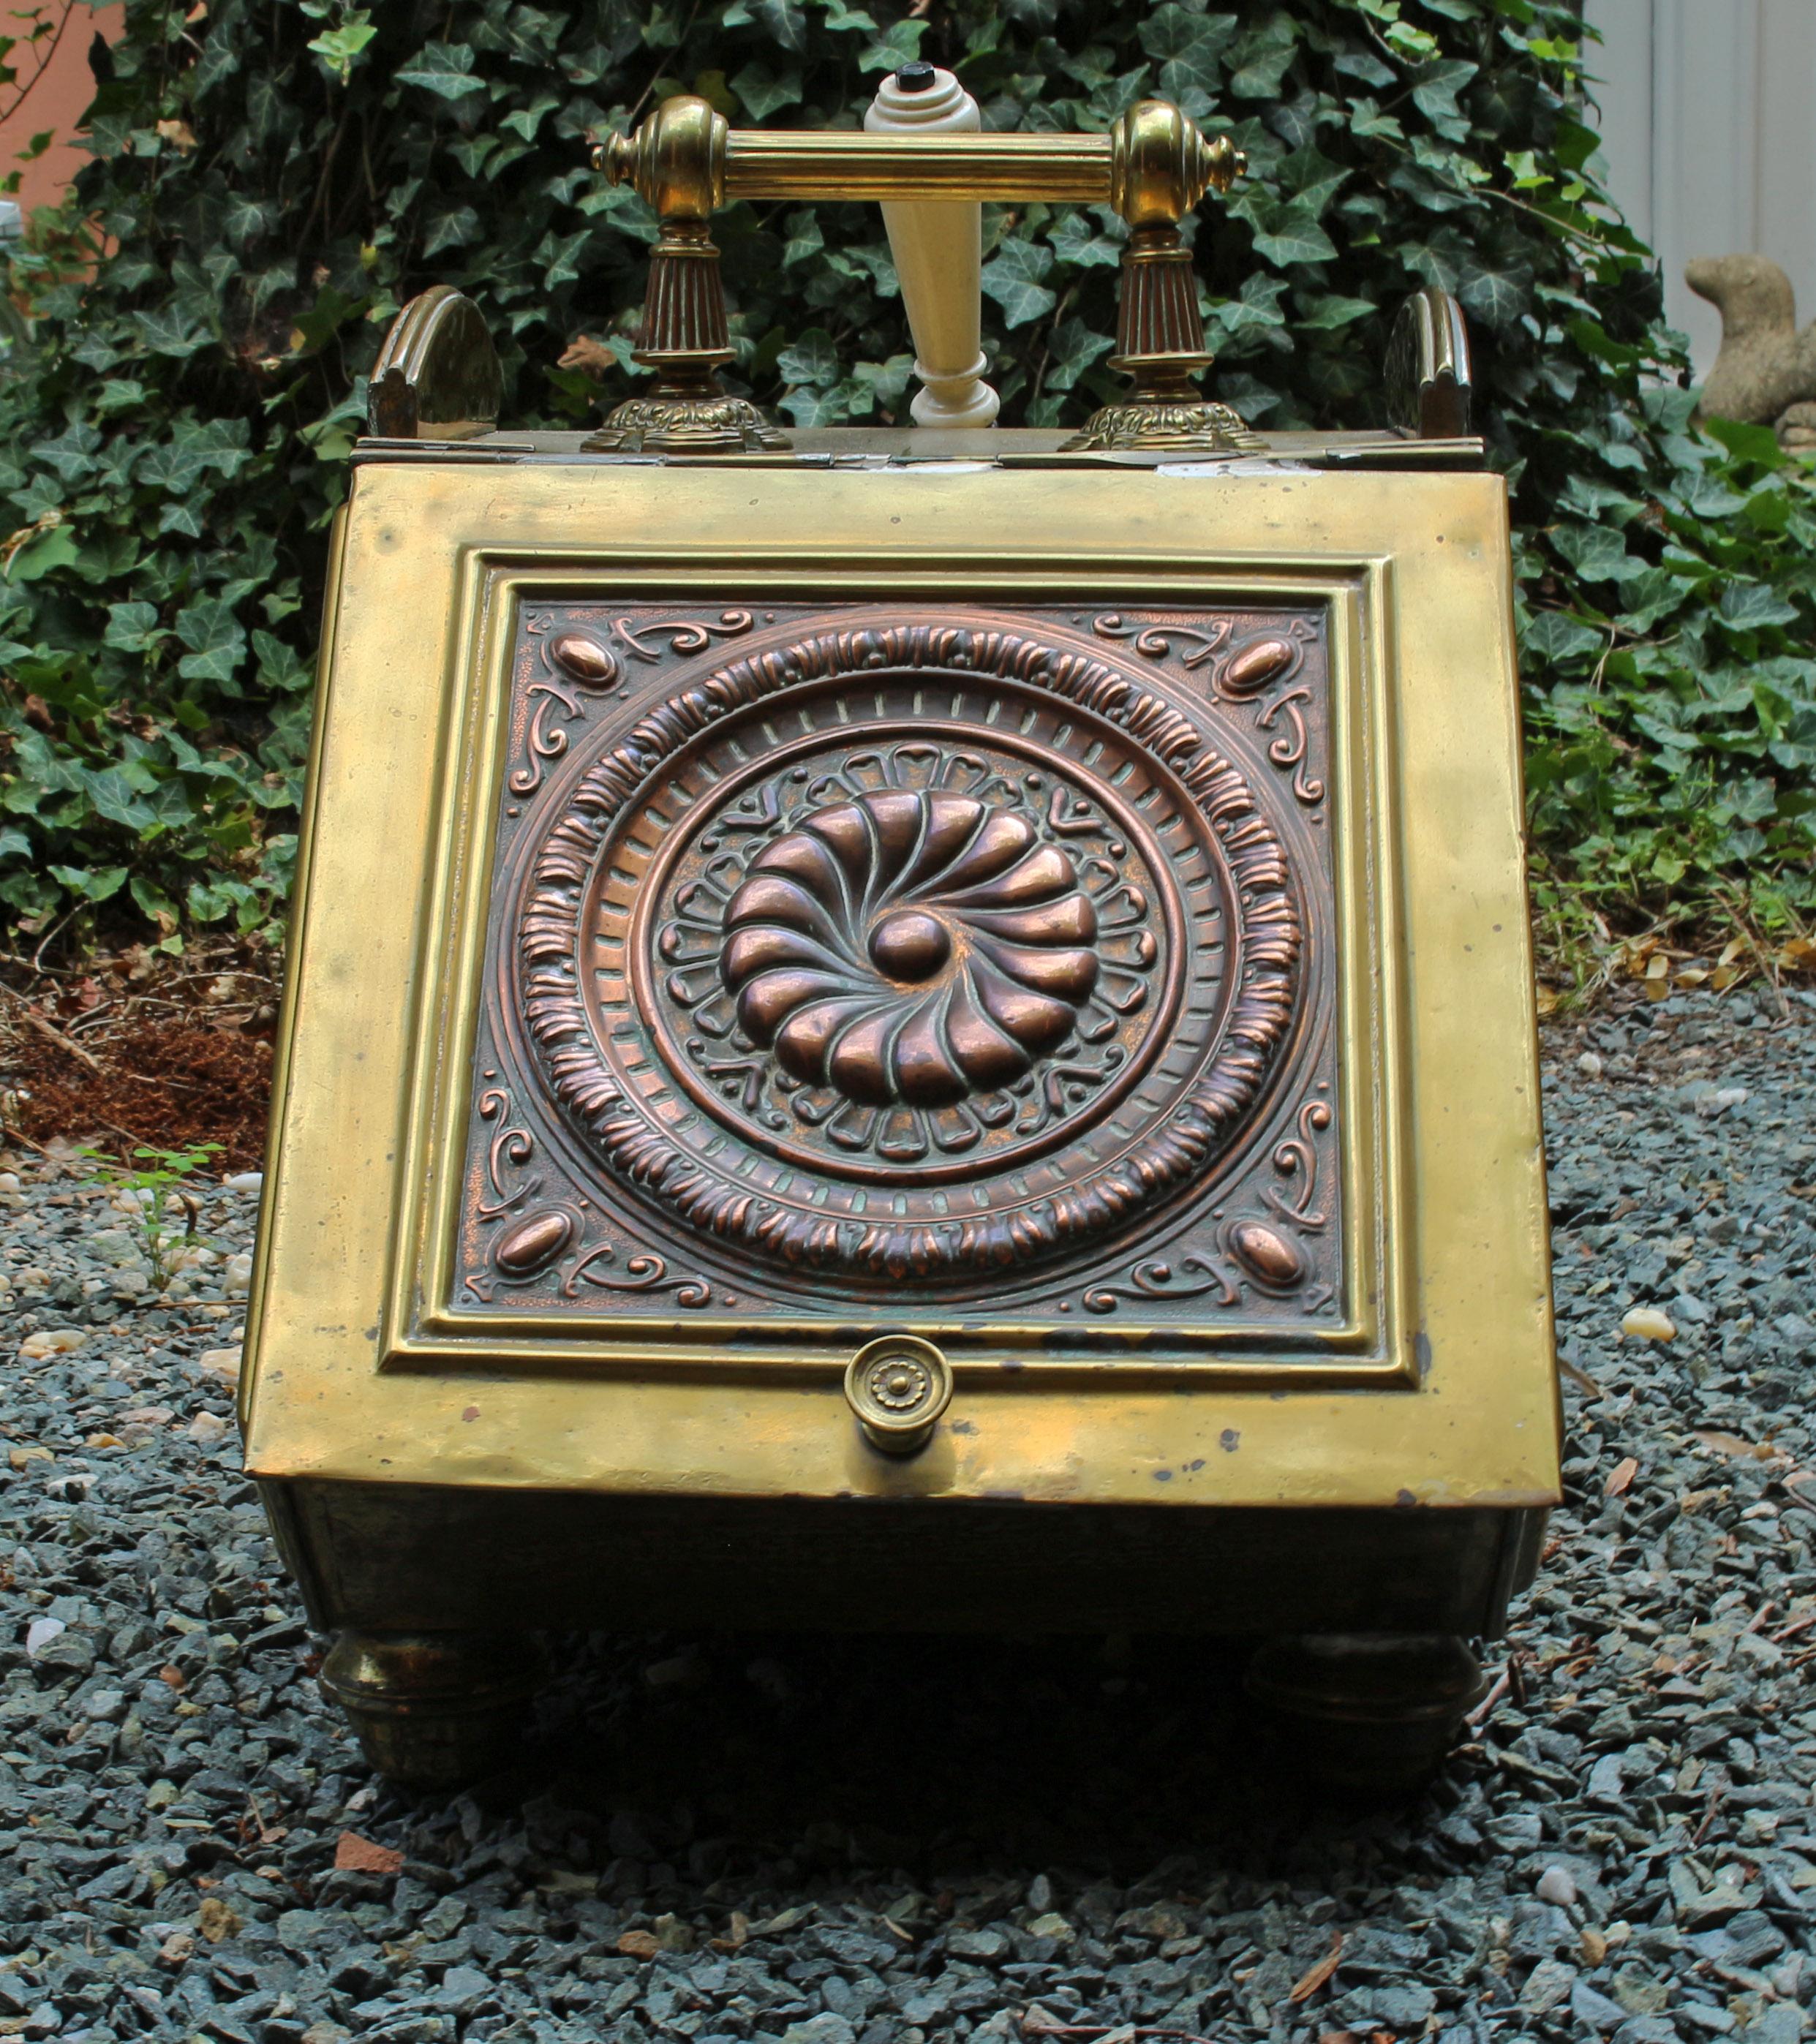 Repoussé Classical Design English Brass and Copper Coal Hod For Sale